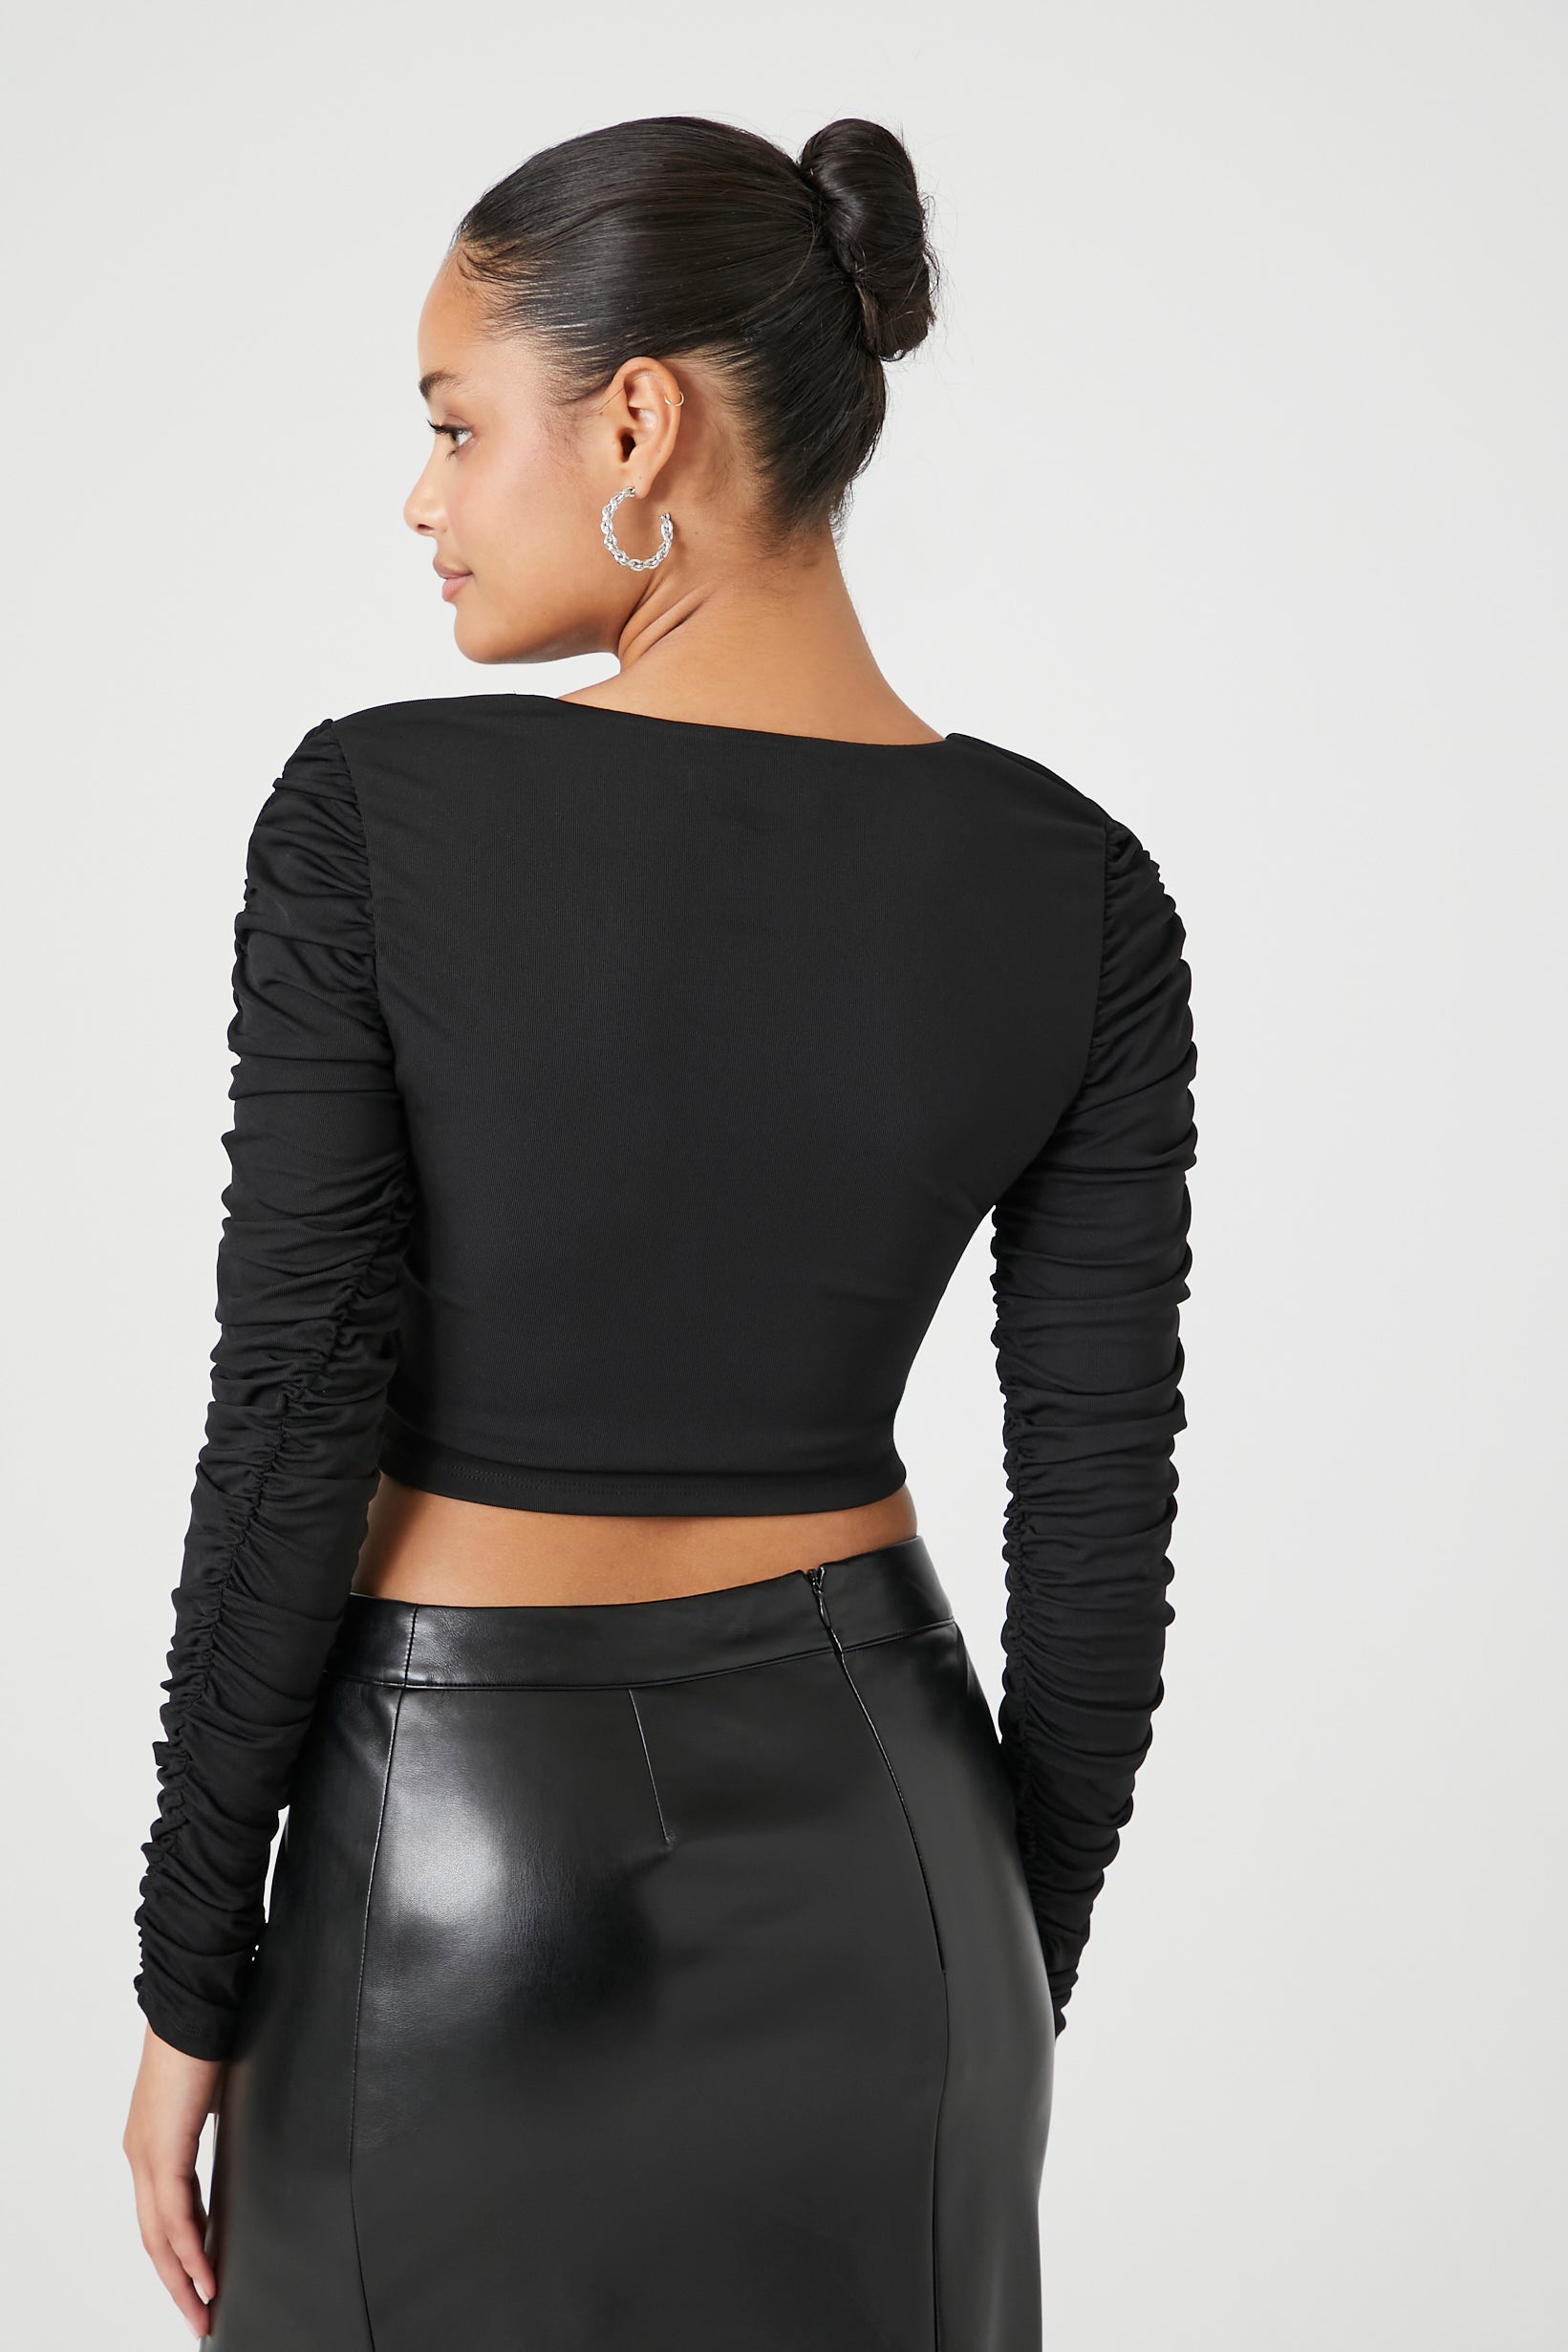 Ruched Lace Up Crop Top